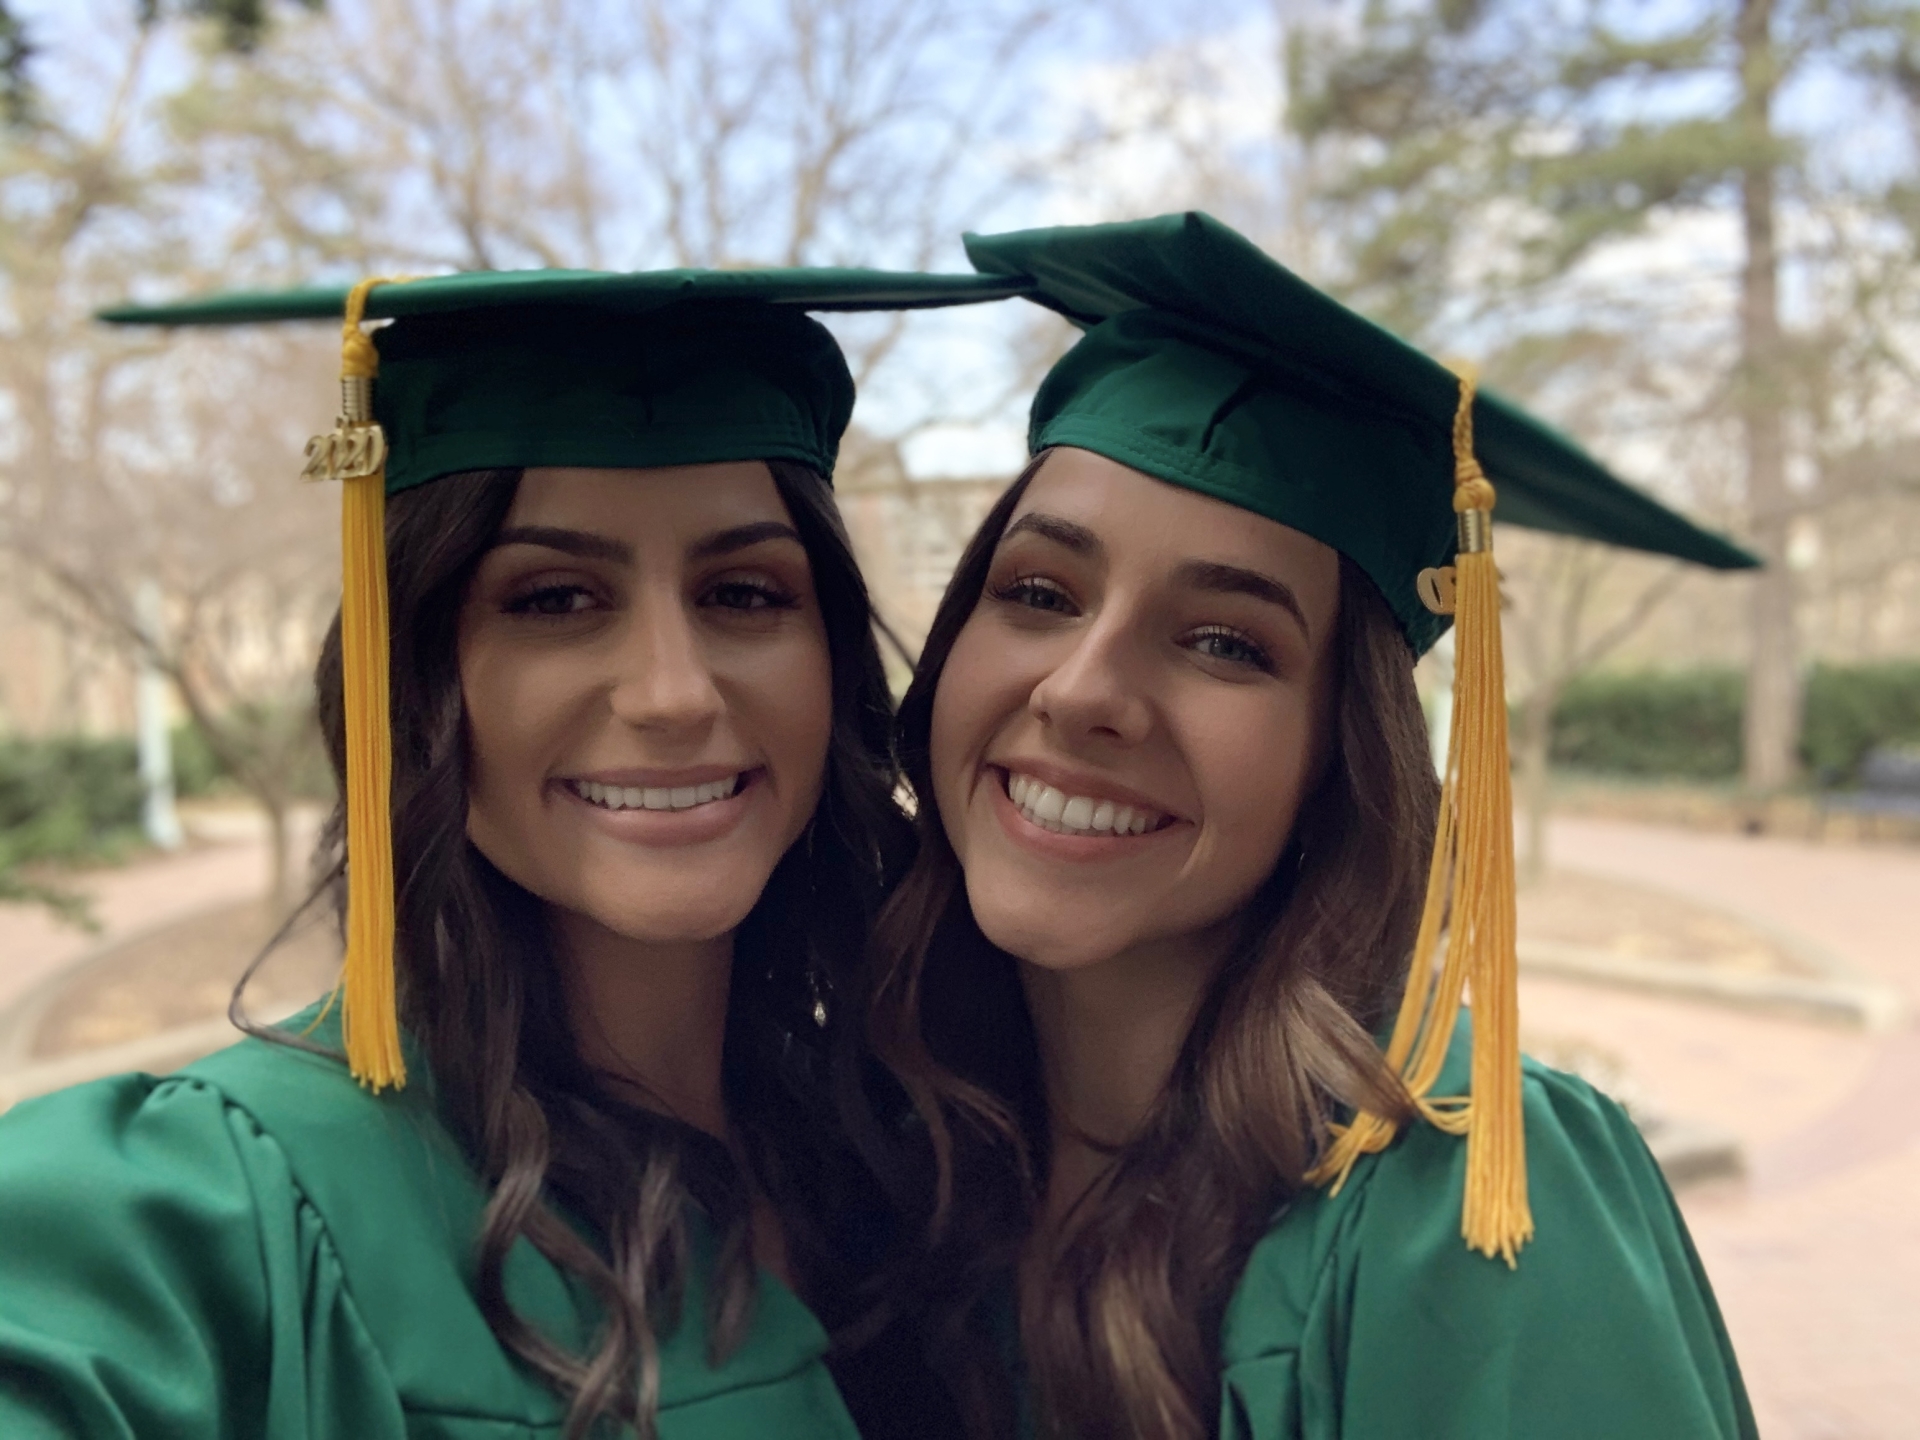 Pictured is Abby on the left and Anna on the right. They both wear MSU graduation caps and gowns, smiling with trees behind them.